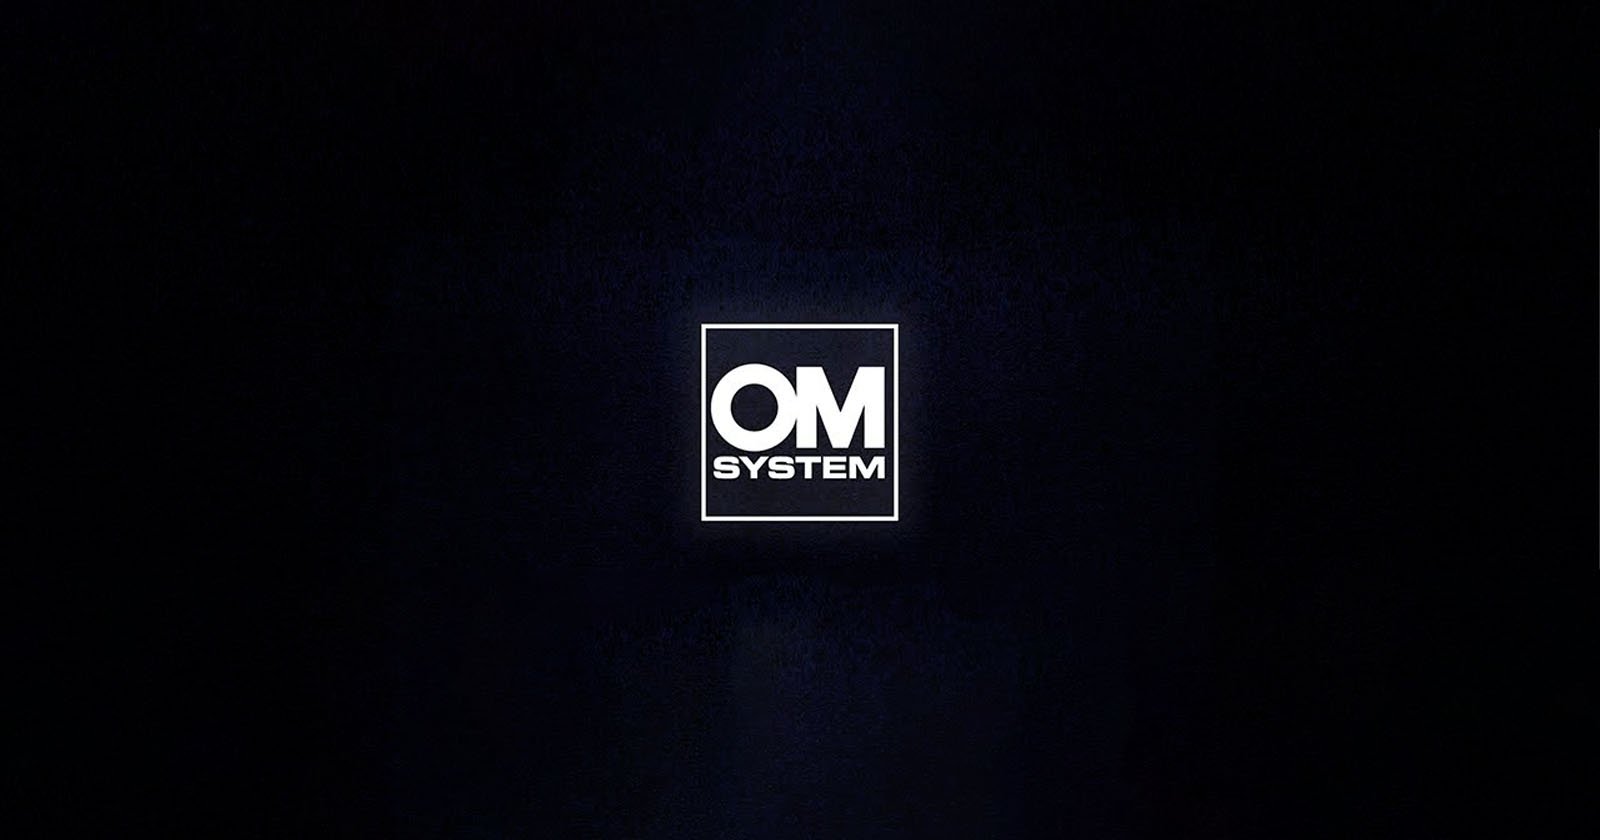 OM Digital Developing a 90mm f/3.5 Macro Lens for Micro Four Thirds